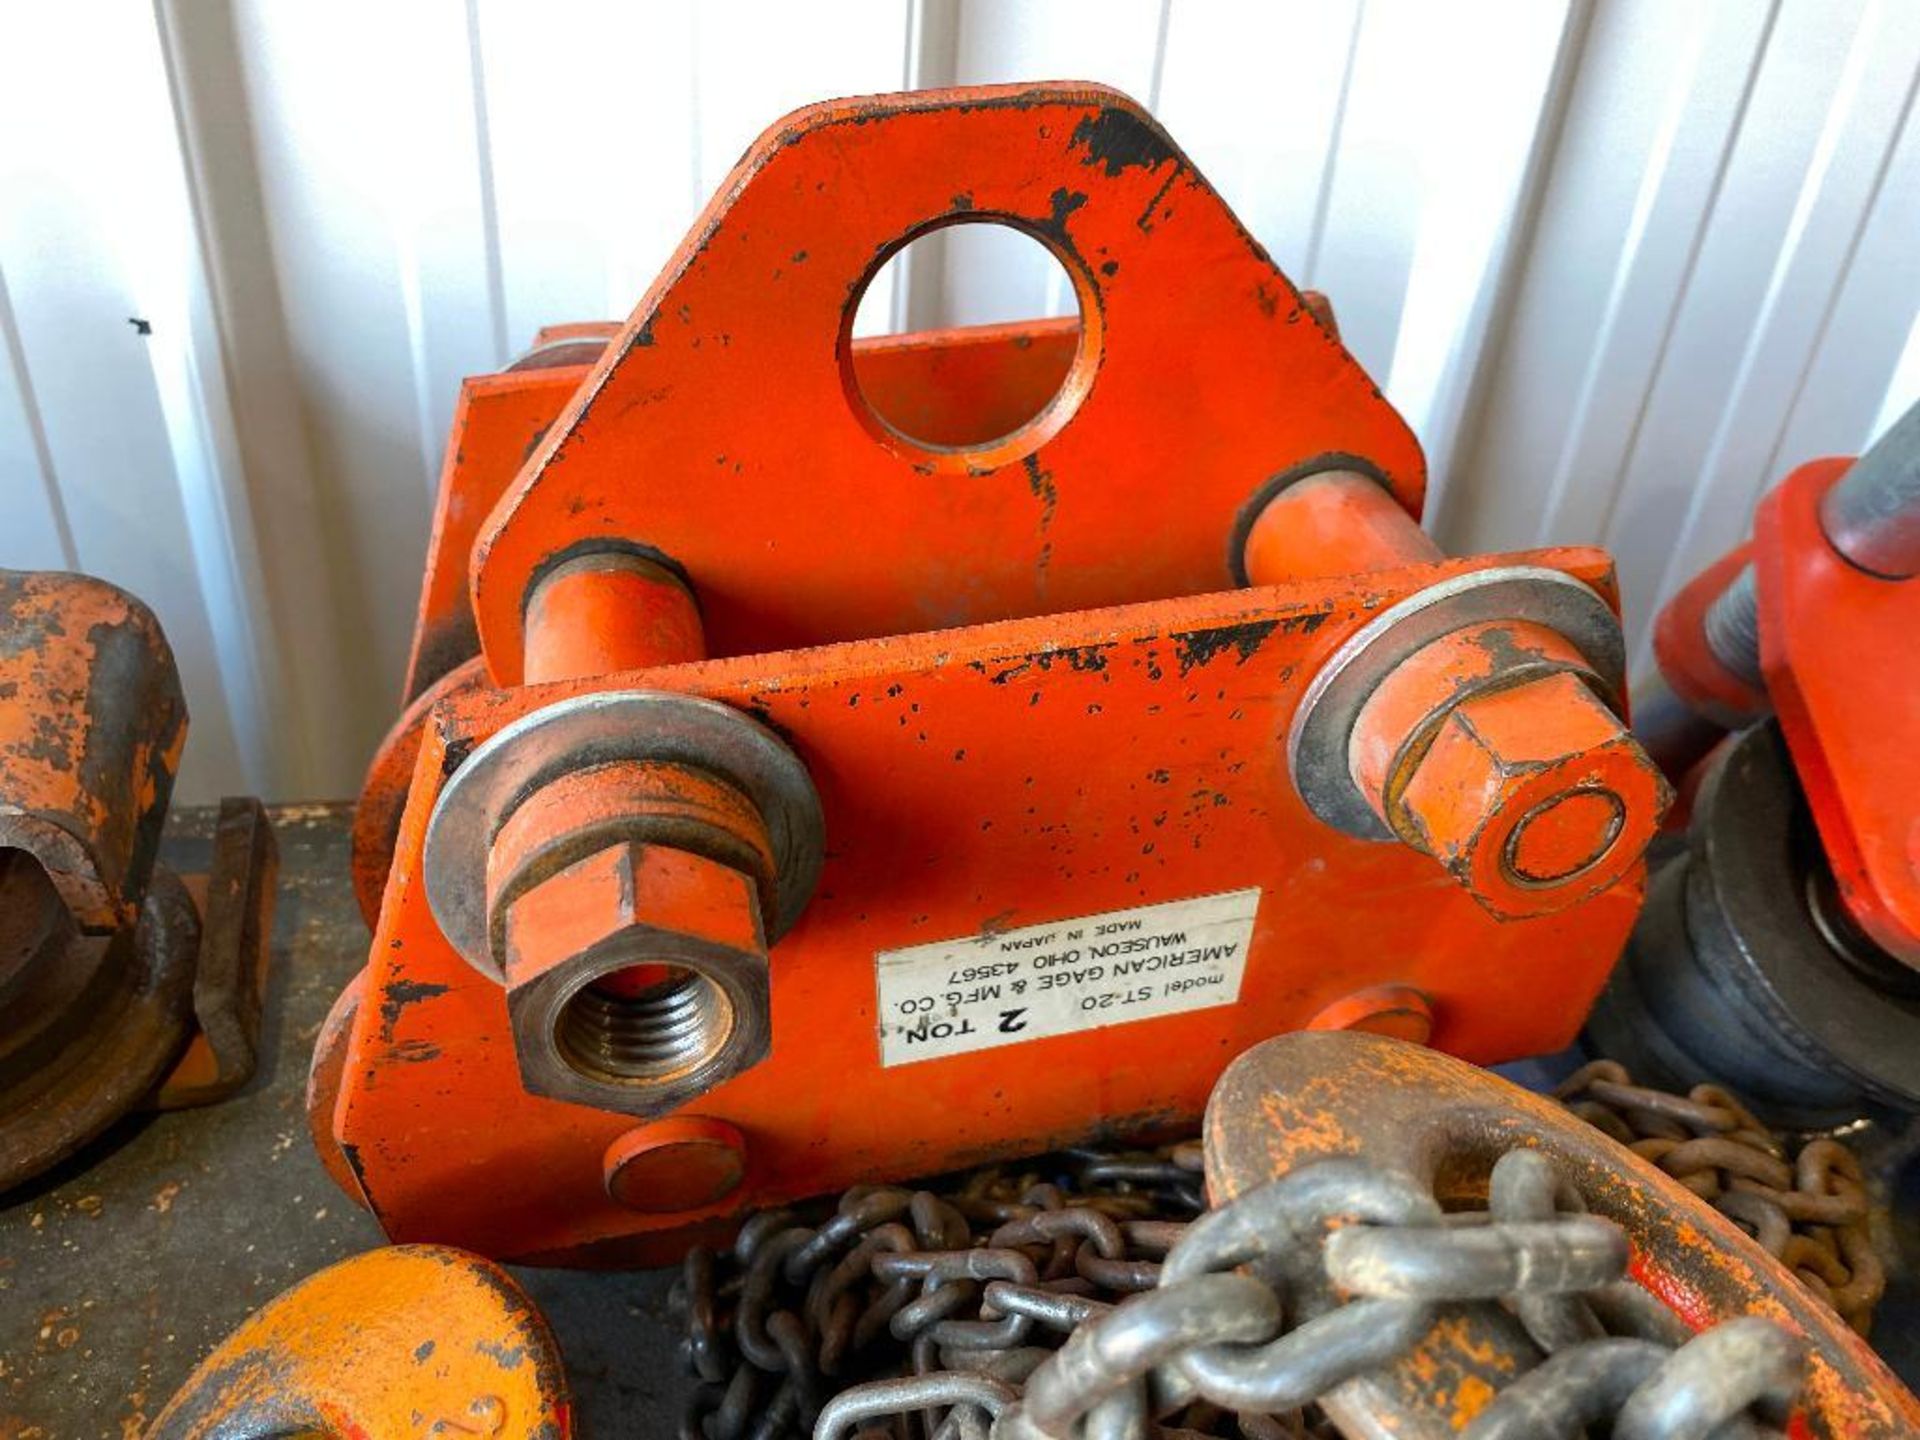 Lot of Kito Corp 2-Ton Chain Hoist and American Gauge ST-20 2-Ton Beam Roller - Image 3 of 4